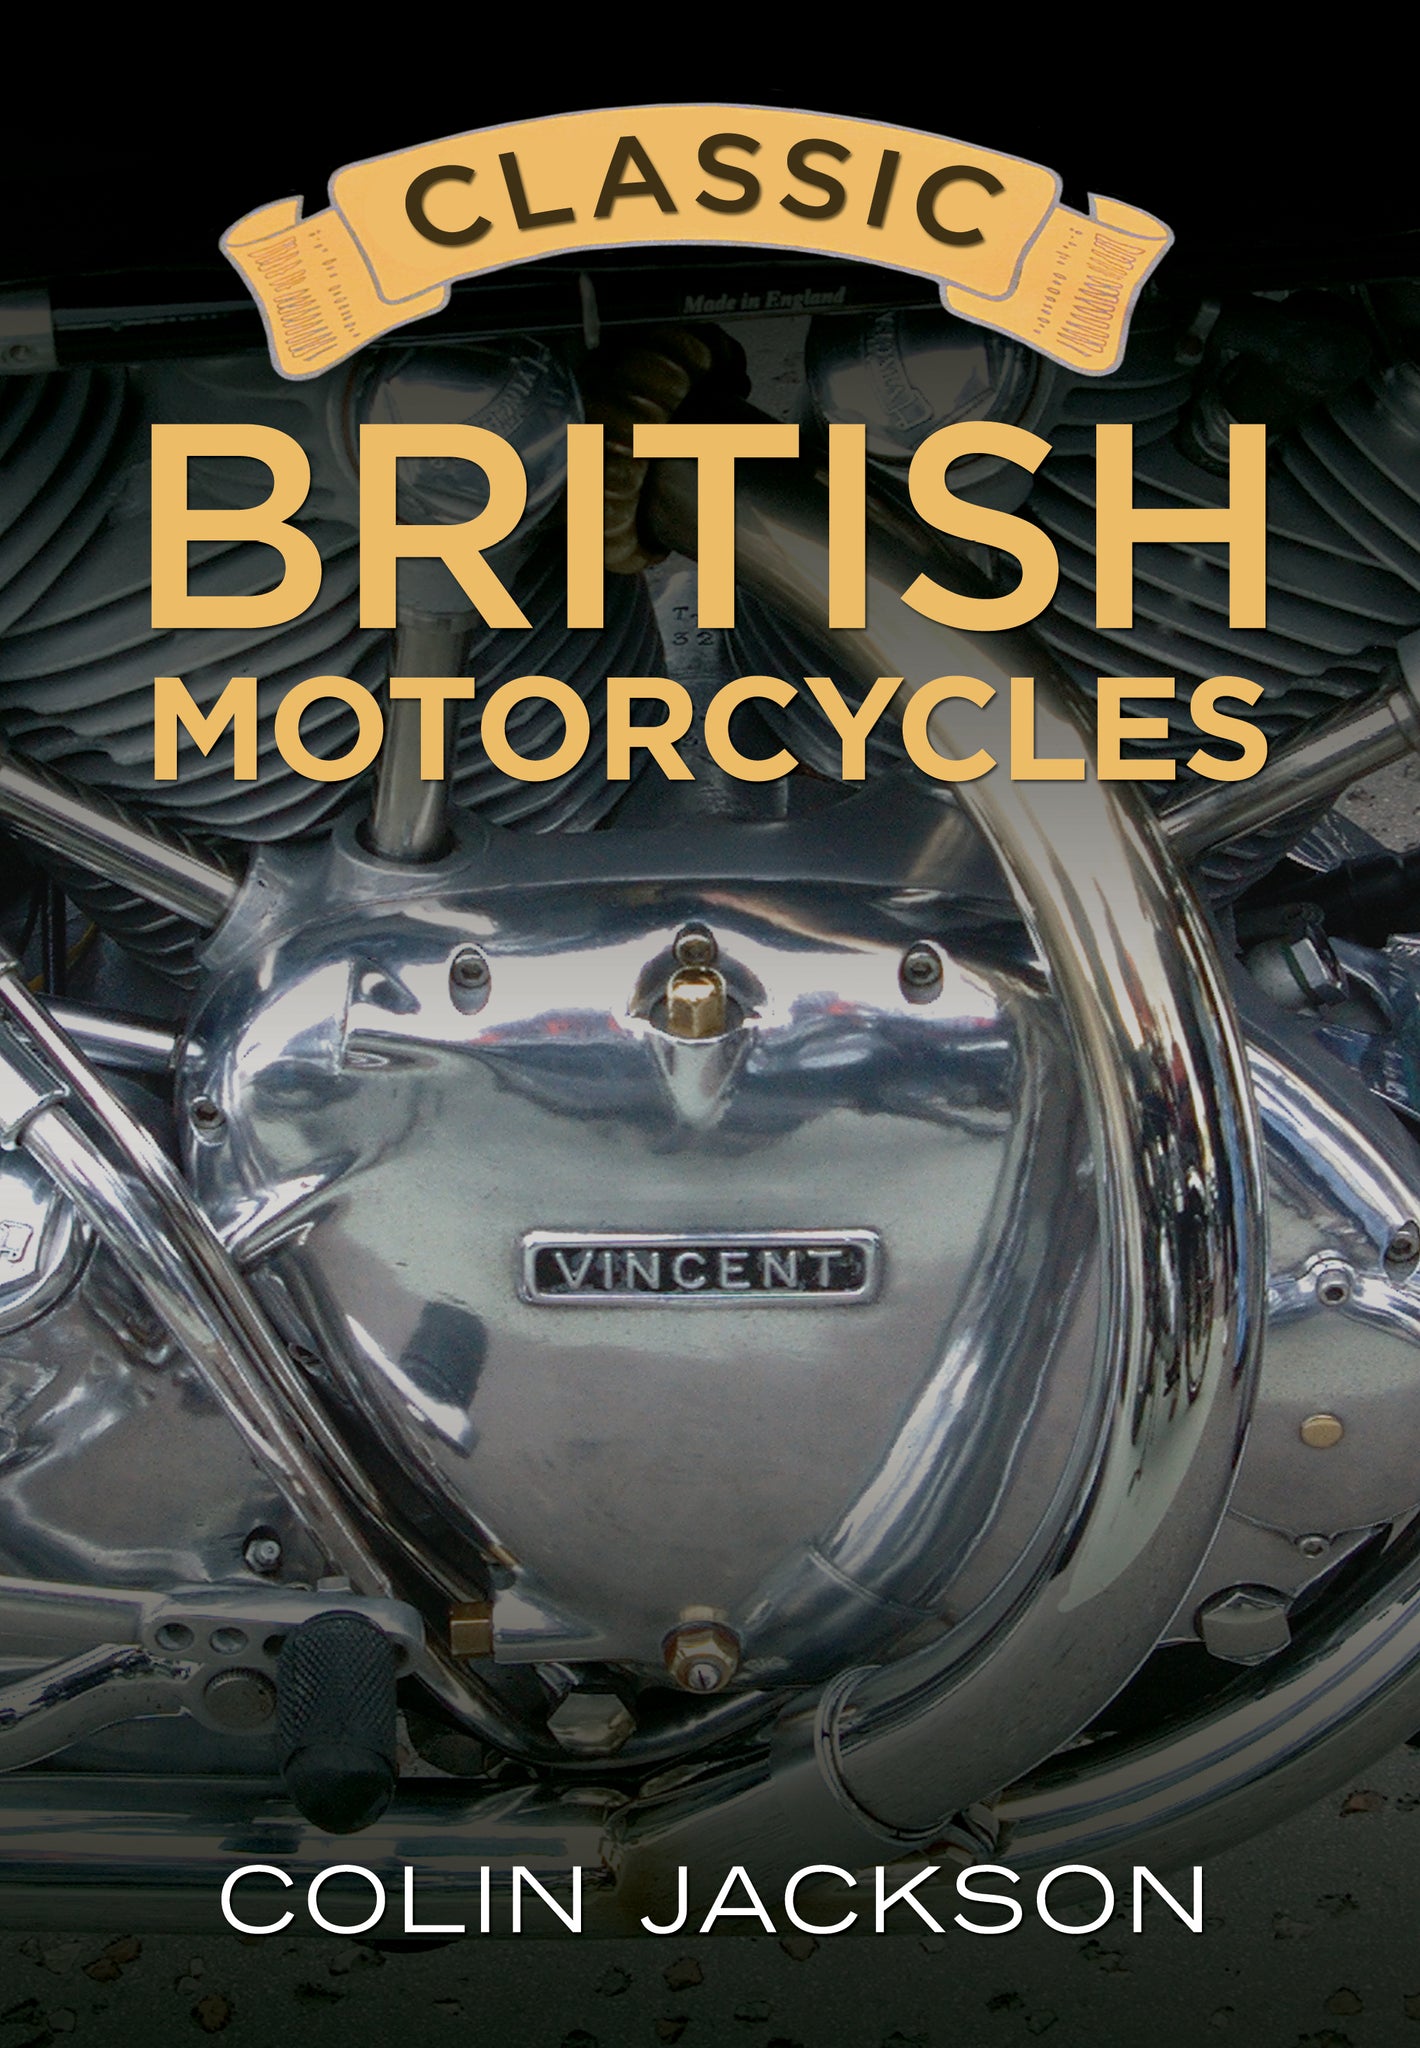 Classic British Motorcycles - available now from Fonthill Media